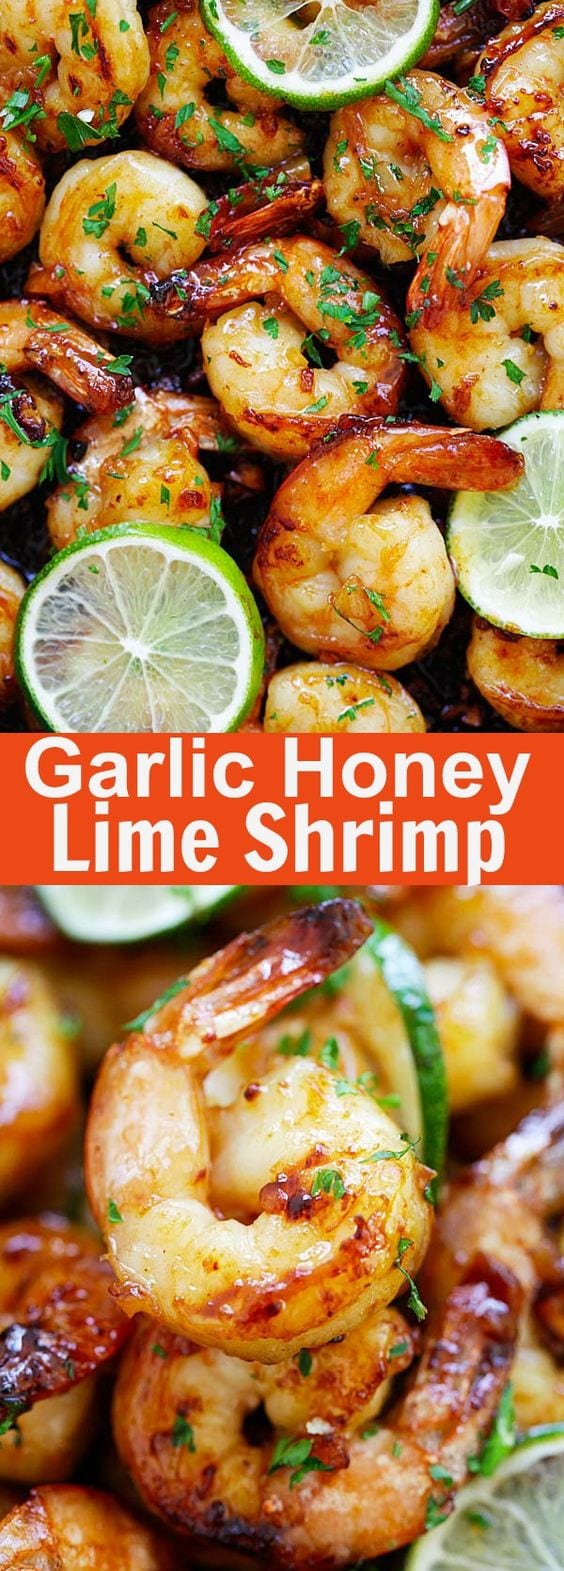 Garlic Honey Lime Shrimp – garlicky, sweet, sticky skillet shrimp with fresh lime. This recipe is so good and easy, takes only 15 mins to make | rasamalaysia.com